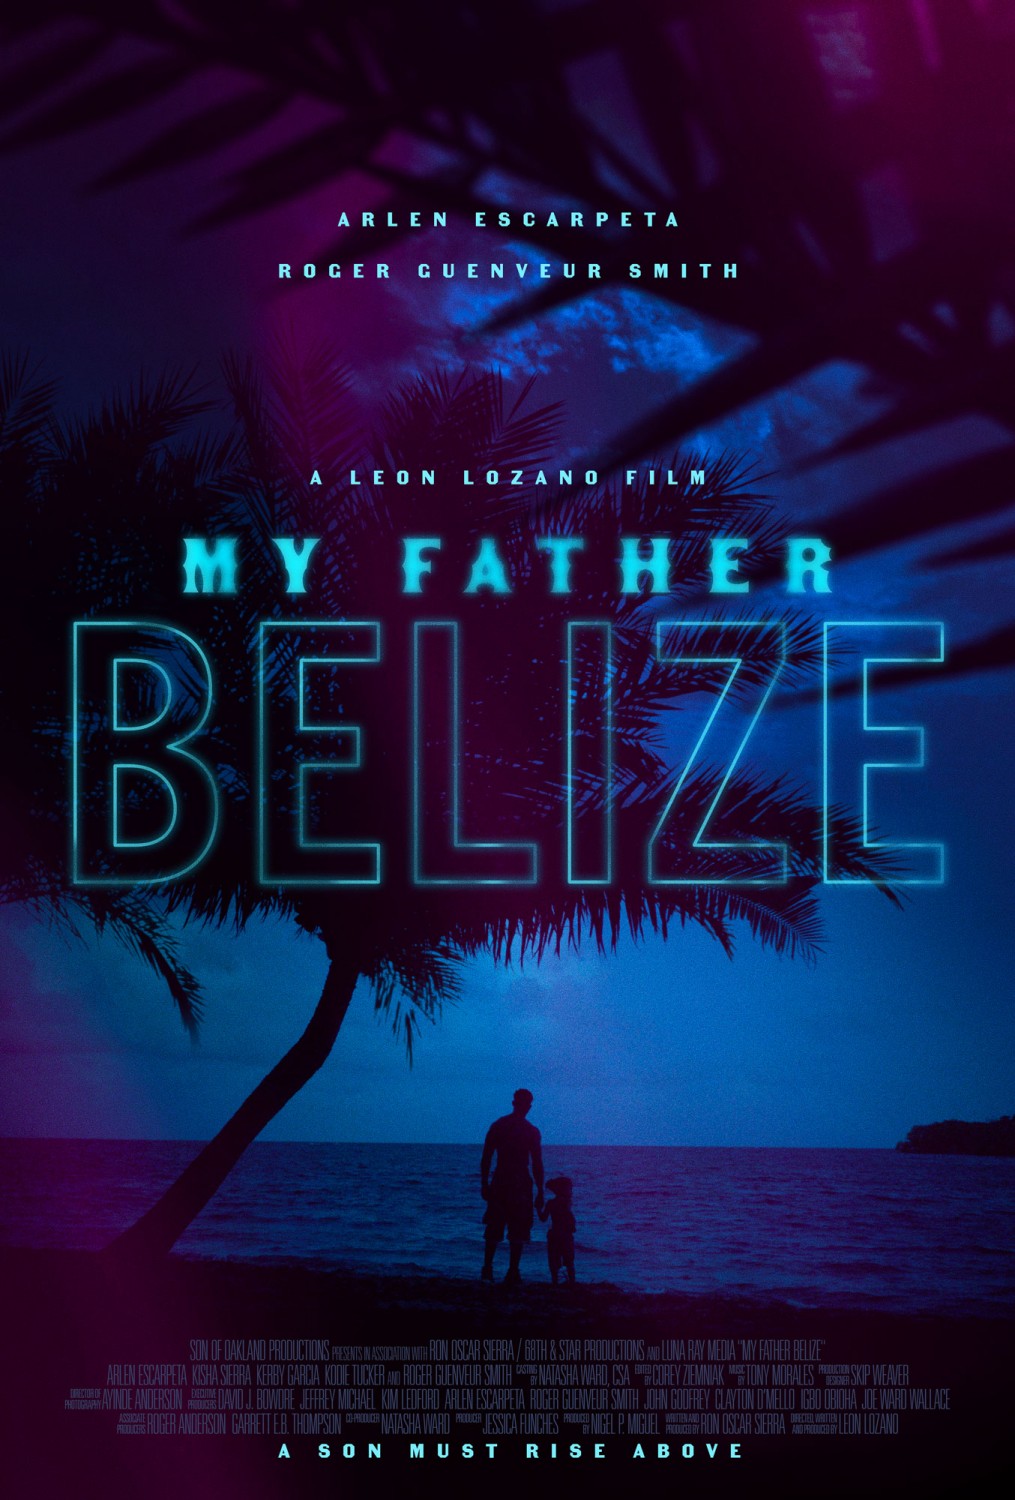 Extra Large Movie Poster Image for My Father Belize